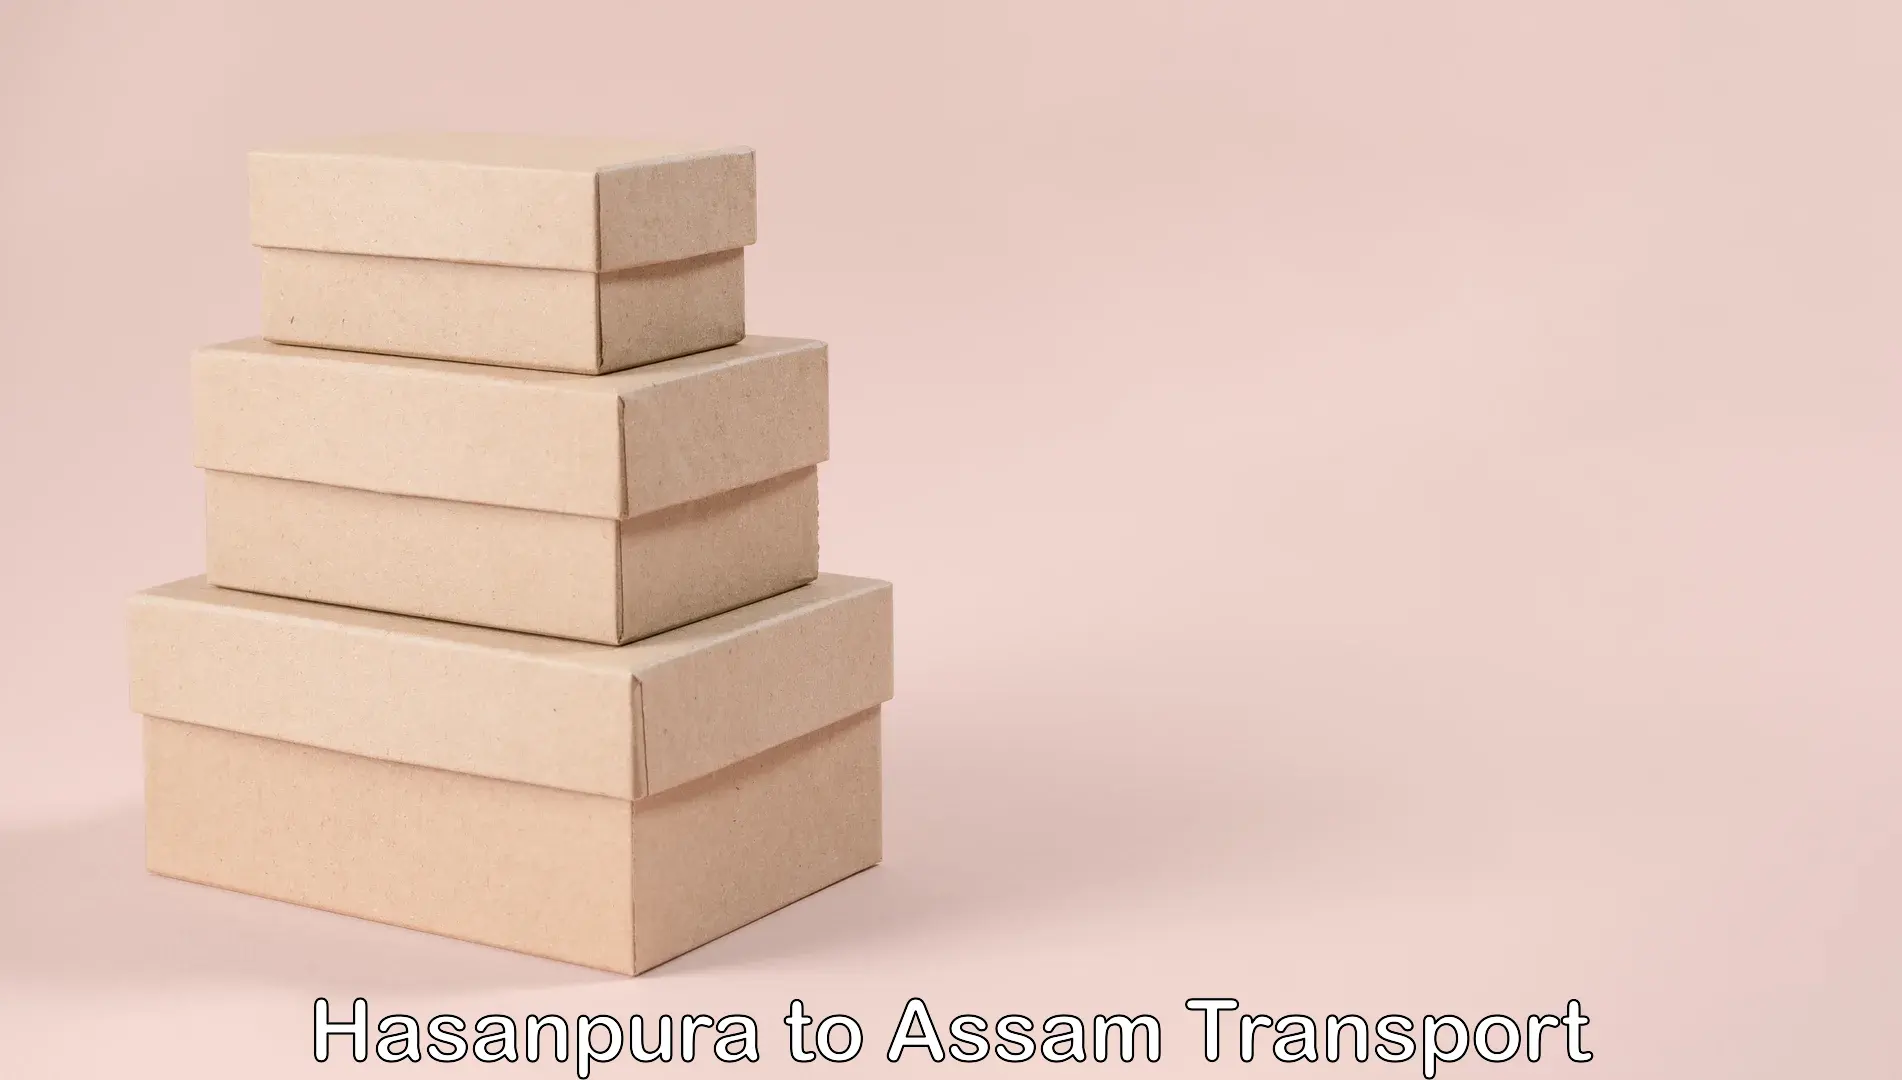 Container transport service Hasanpura to Karbi Anglong